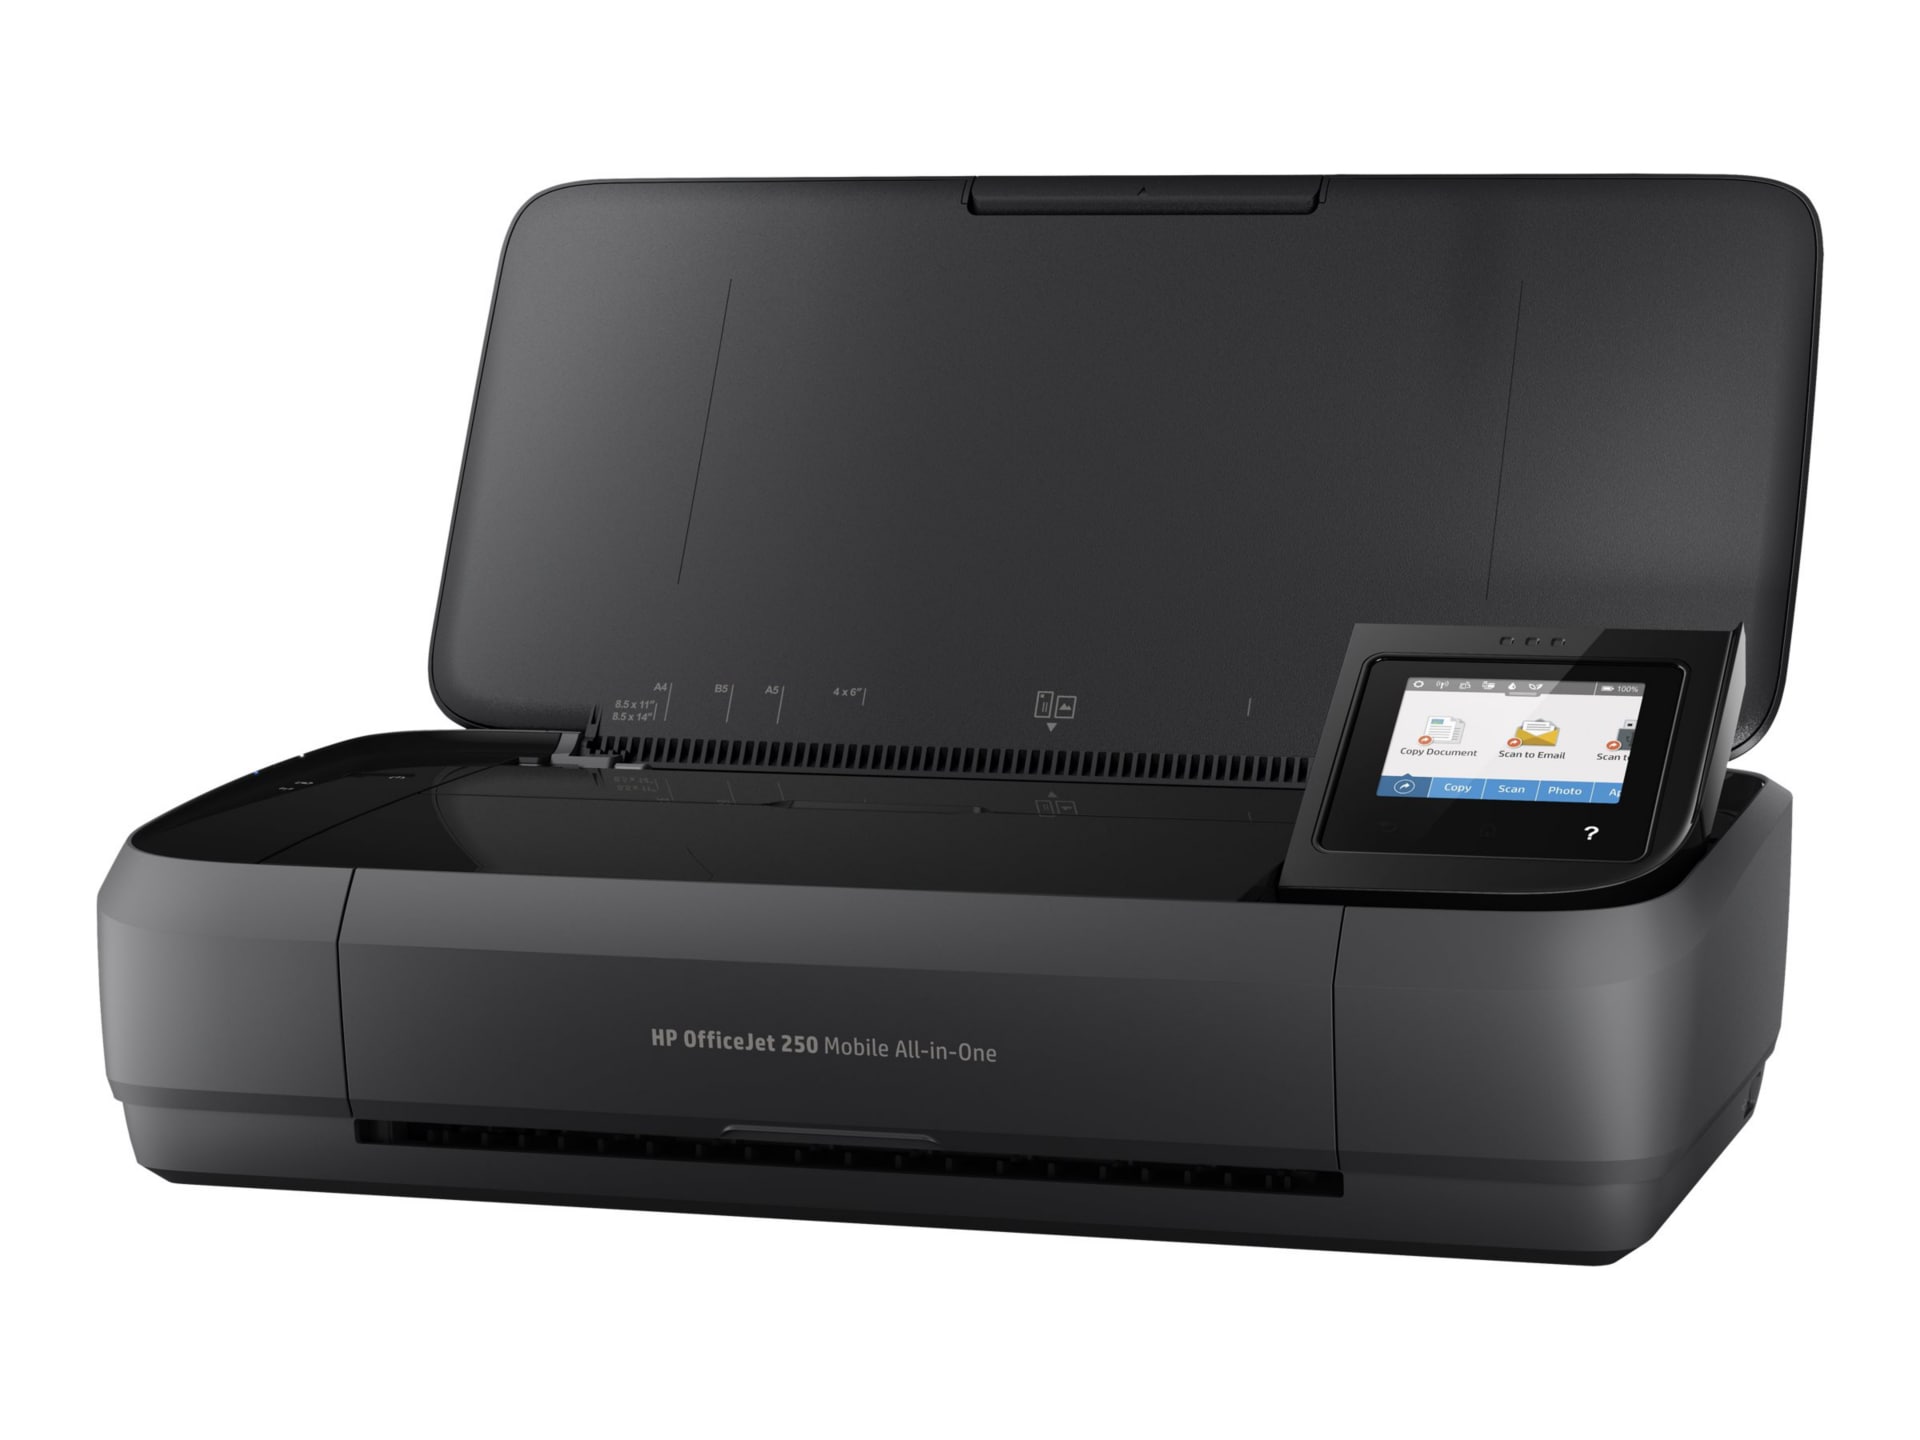 Officejet Mobile All-in-One - multifunction printer - - CZ992A#B1H - All-in-One Printers - CDW.com